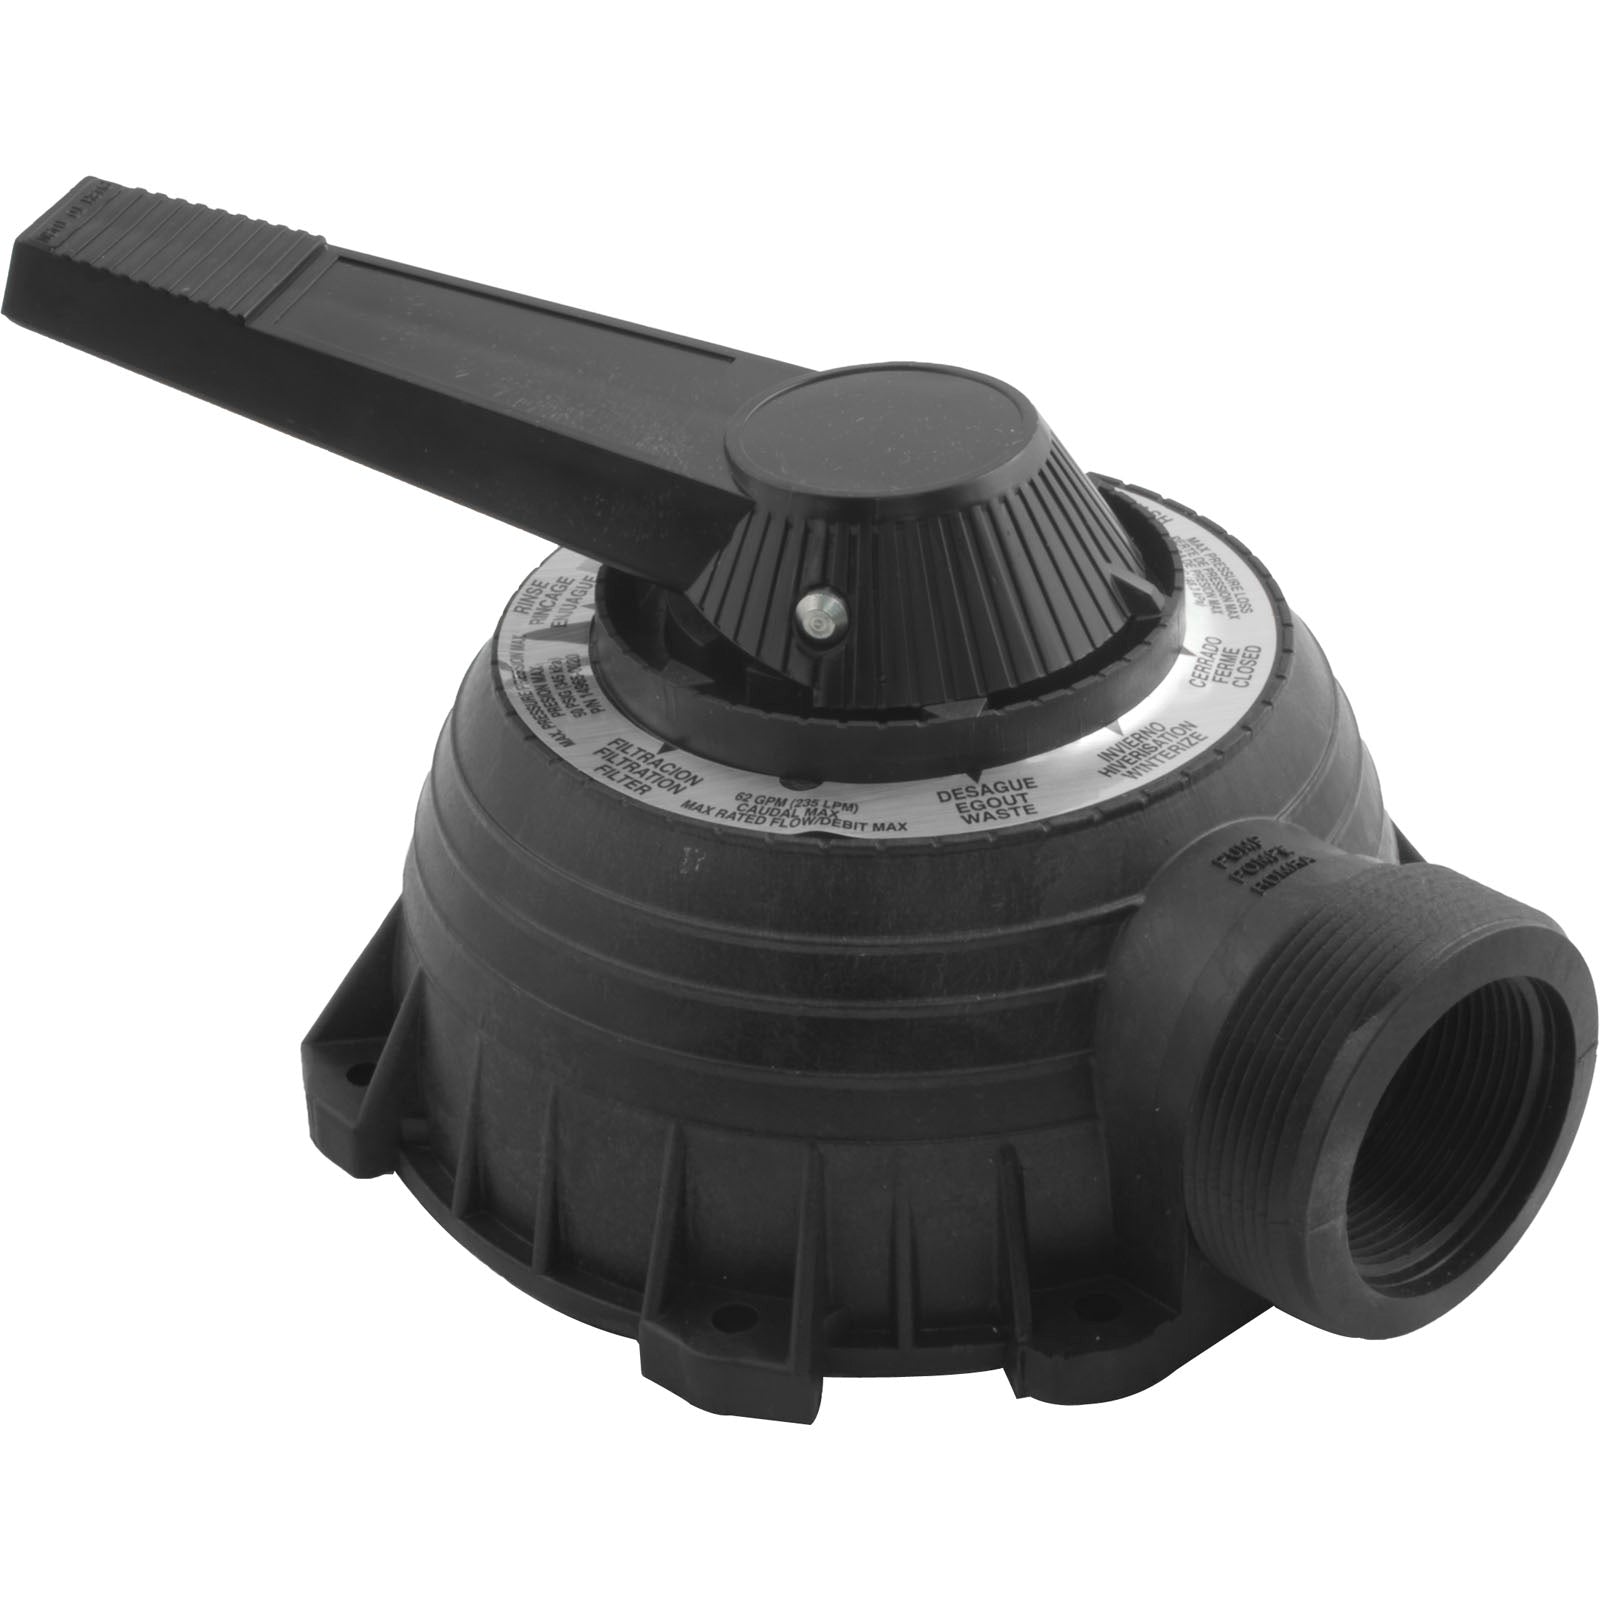 Lid Assembly, Pentair Sta-Rite WC112-148 Valve/ 77704-0104